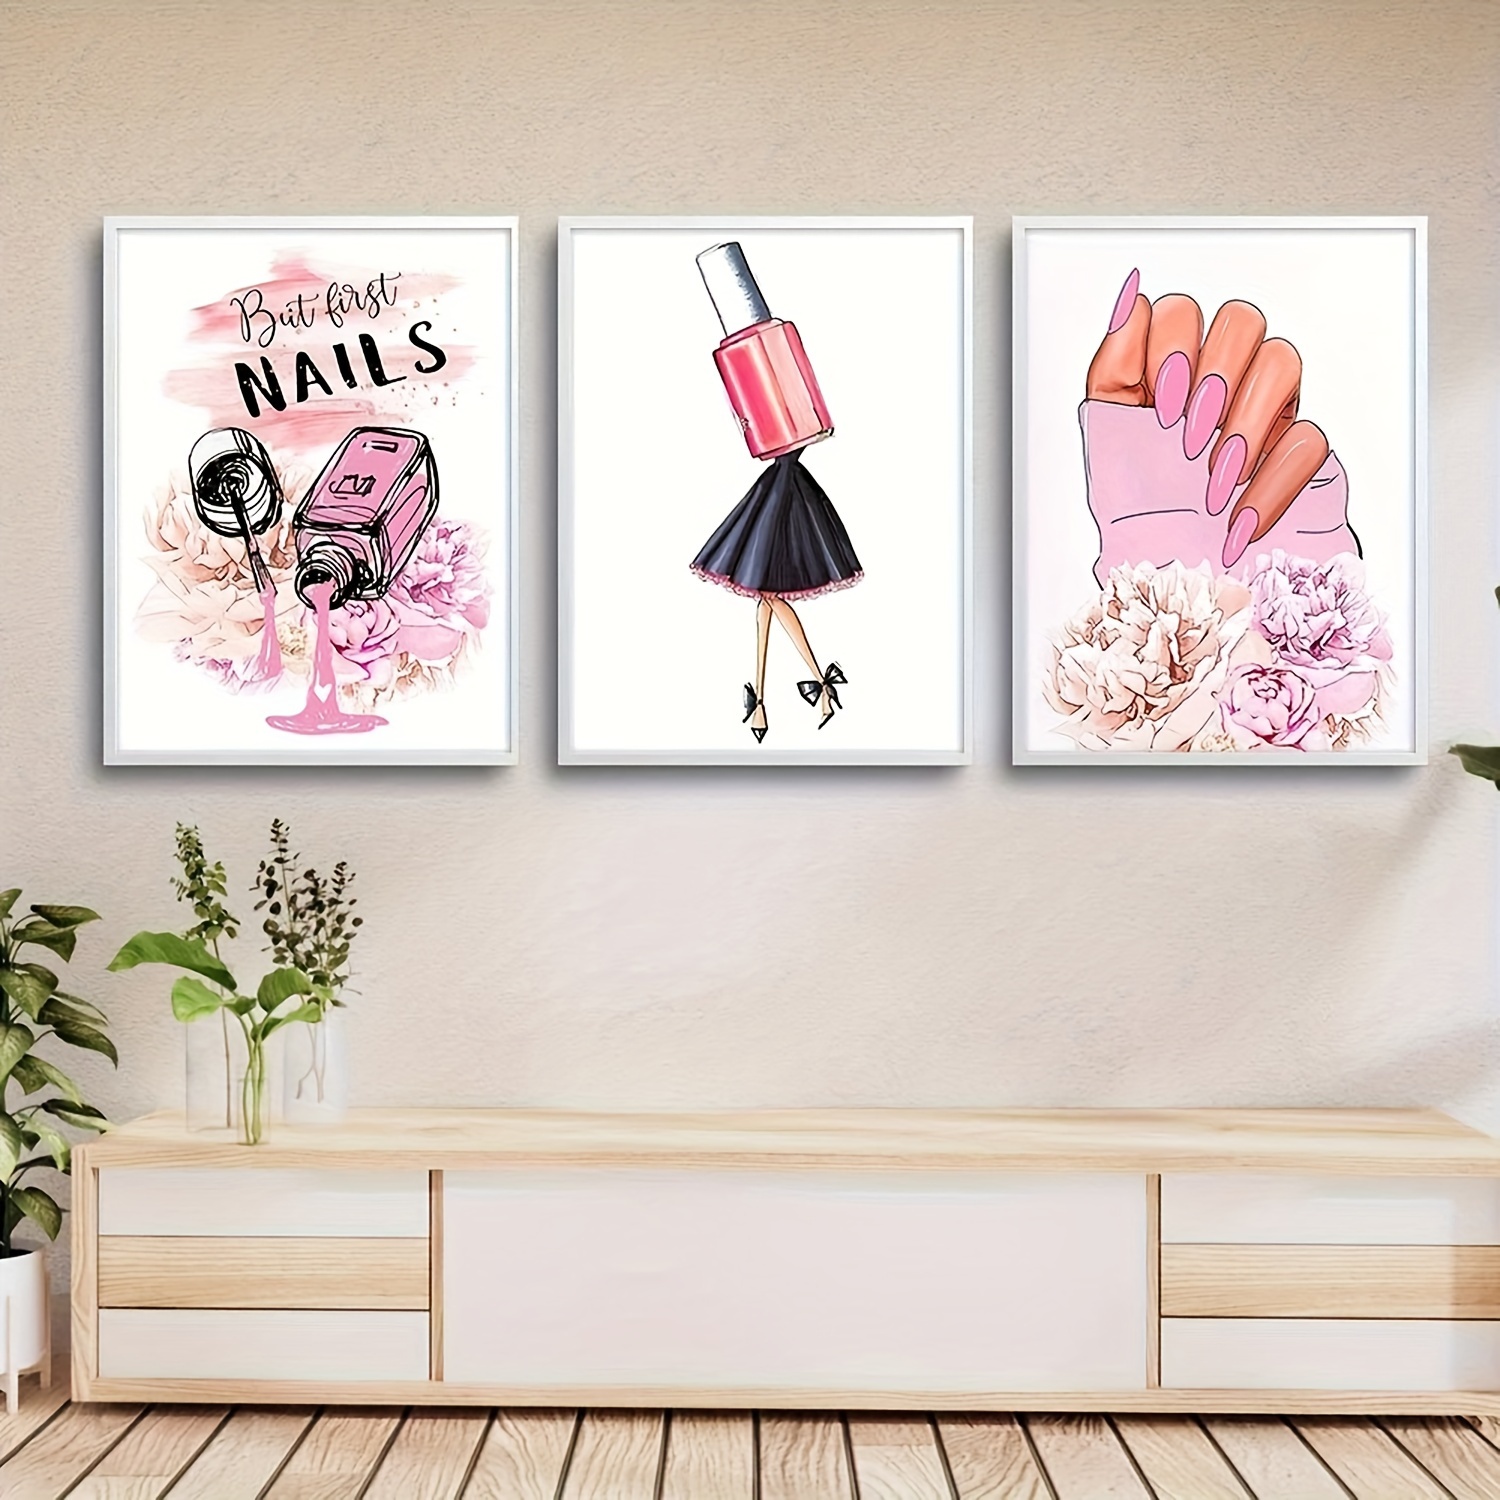 Fashion and Beauty Inspiration Quotes Wall Art